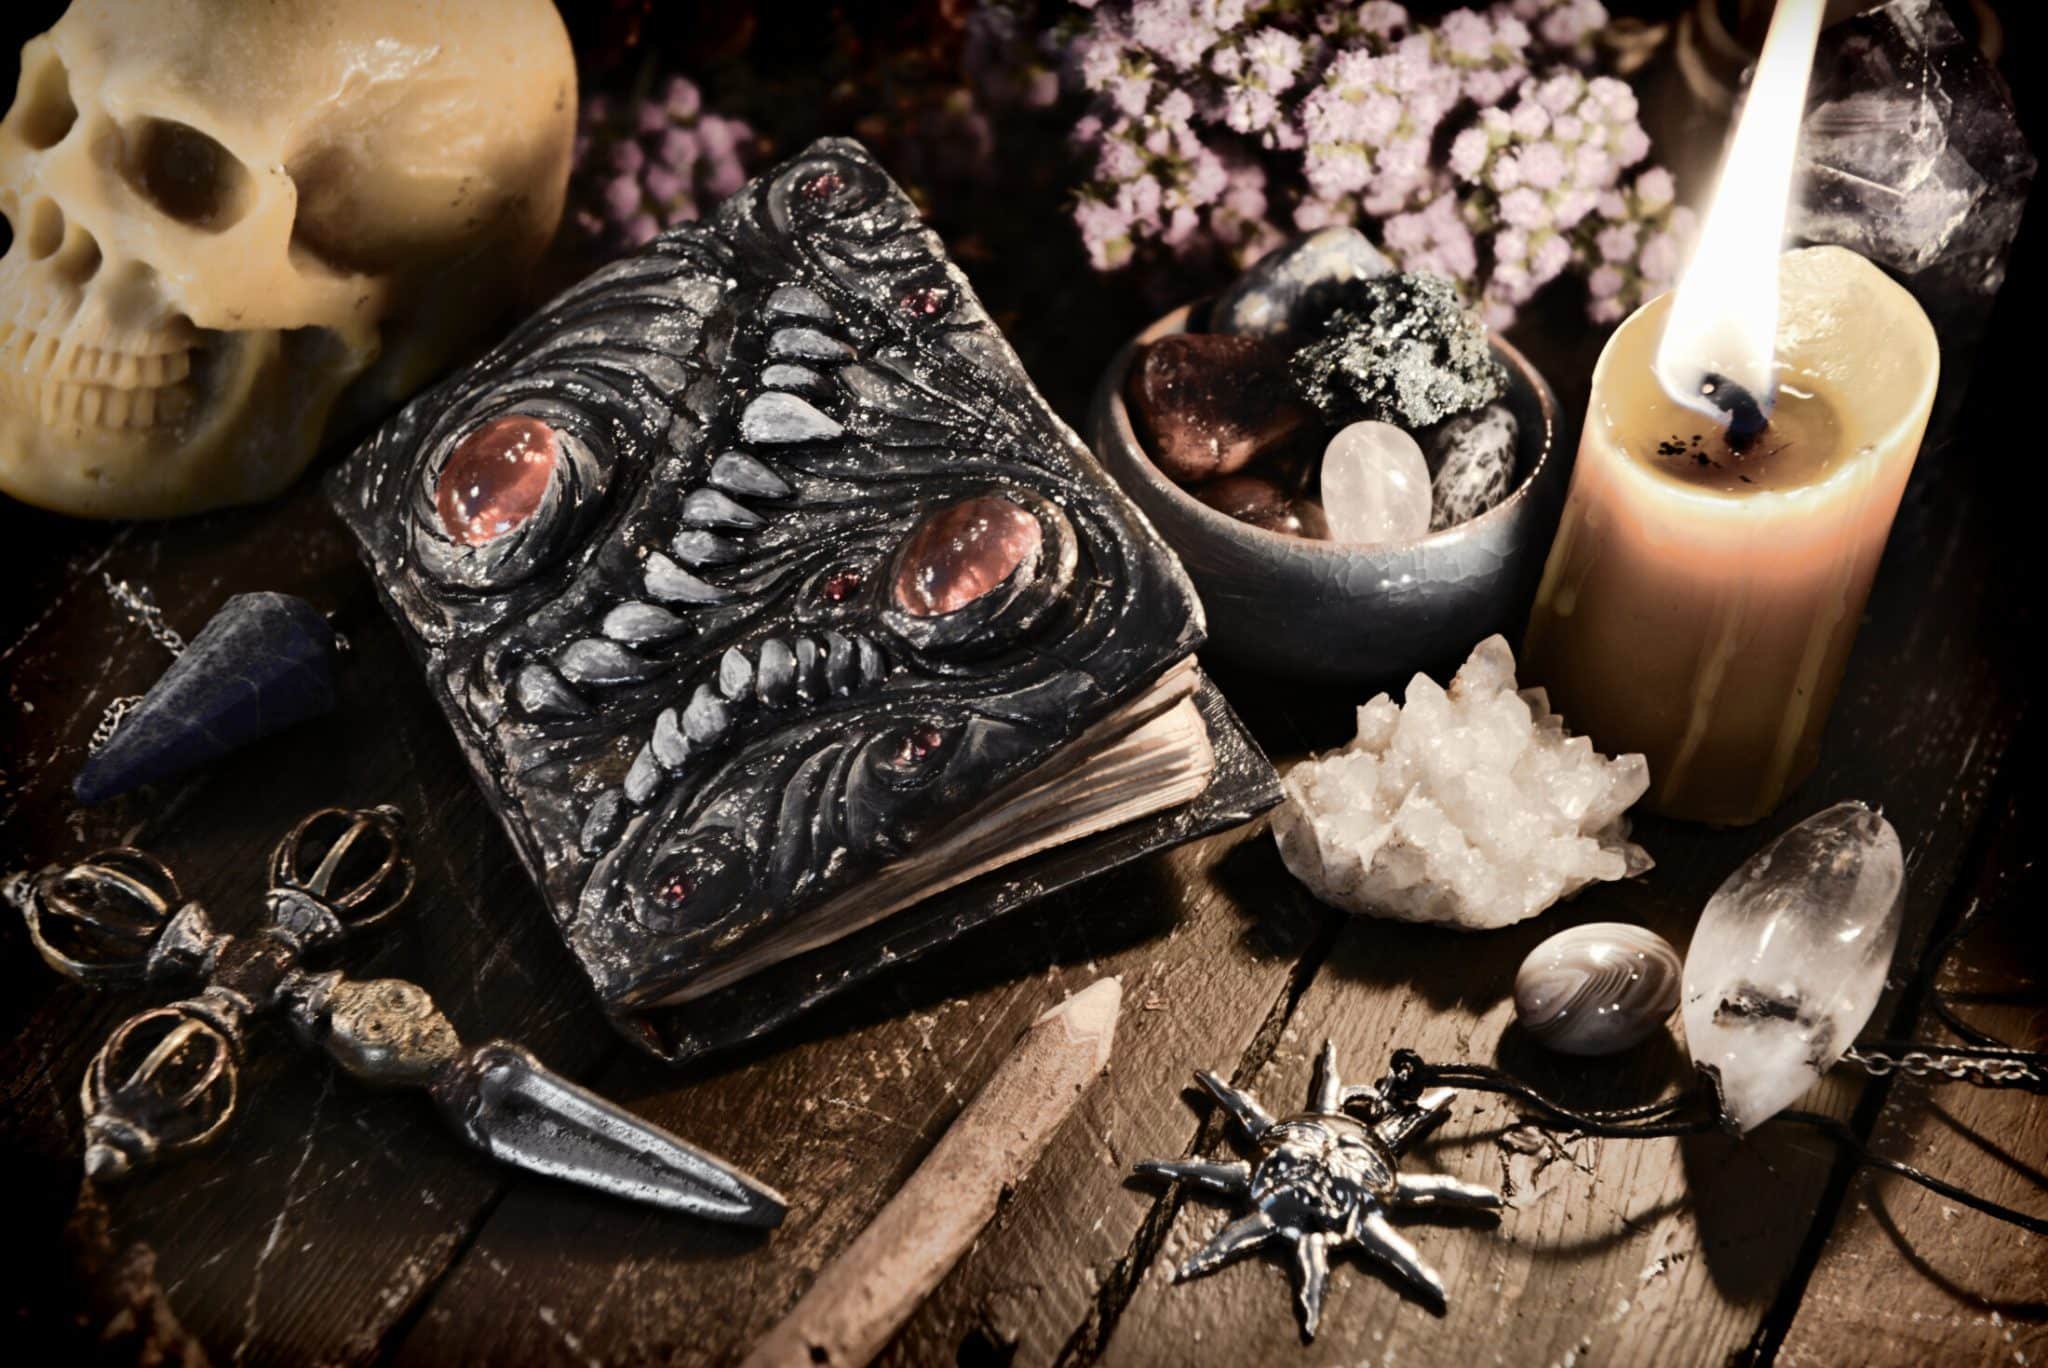 Scary evil book with skull and burning candle. Wicca, esoteric and occult background with vintage magic objects for mystic rituals. Halloween and gothic concept